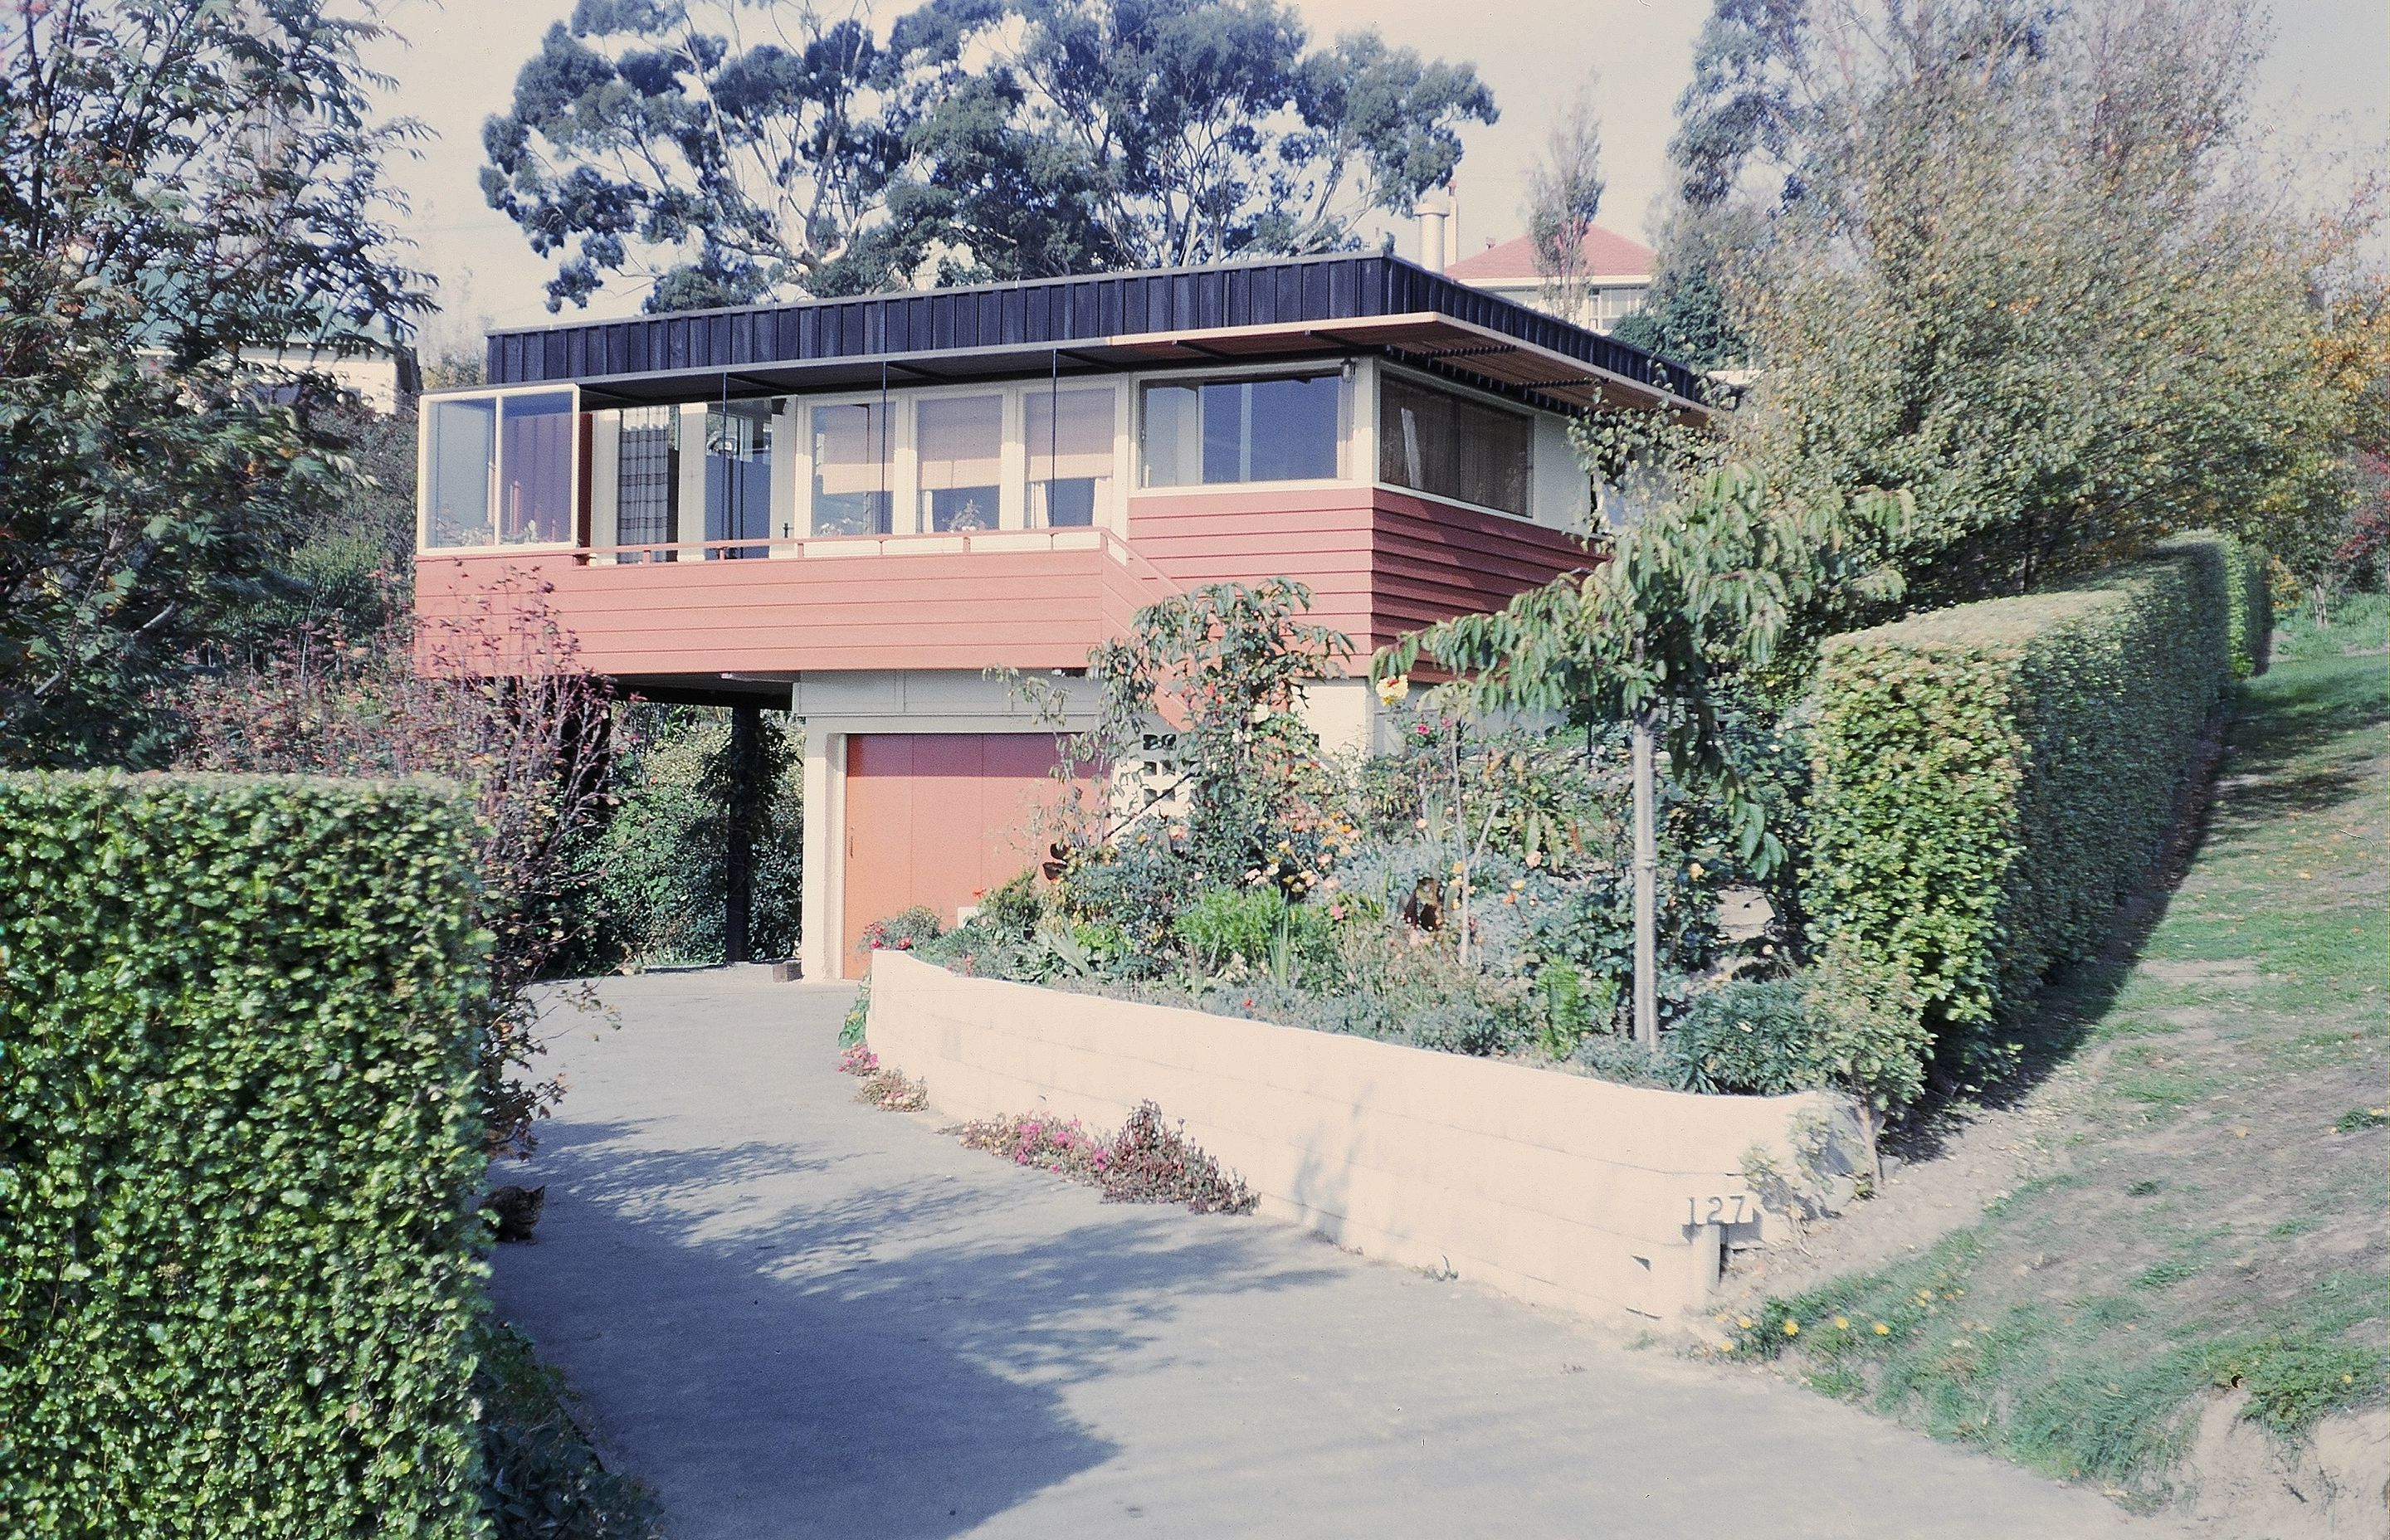 The original house again several years later with partially enclosed balcony and covered addition.